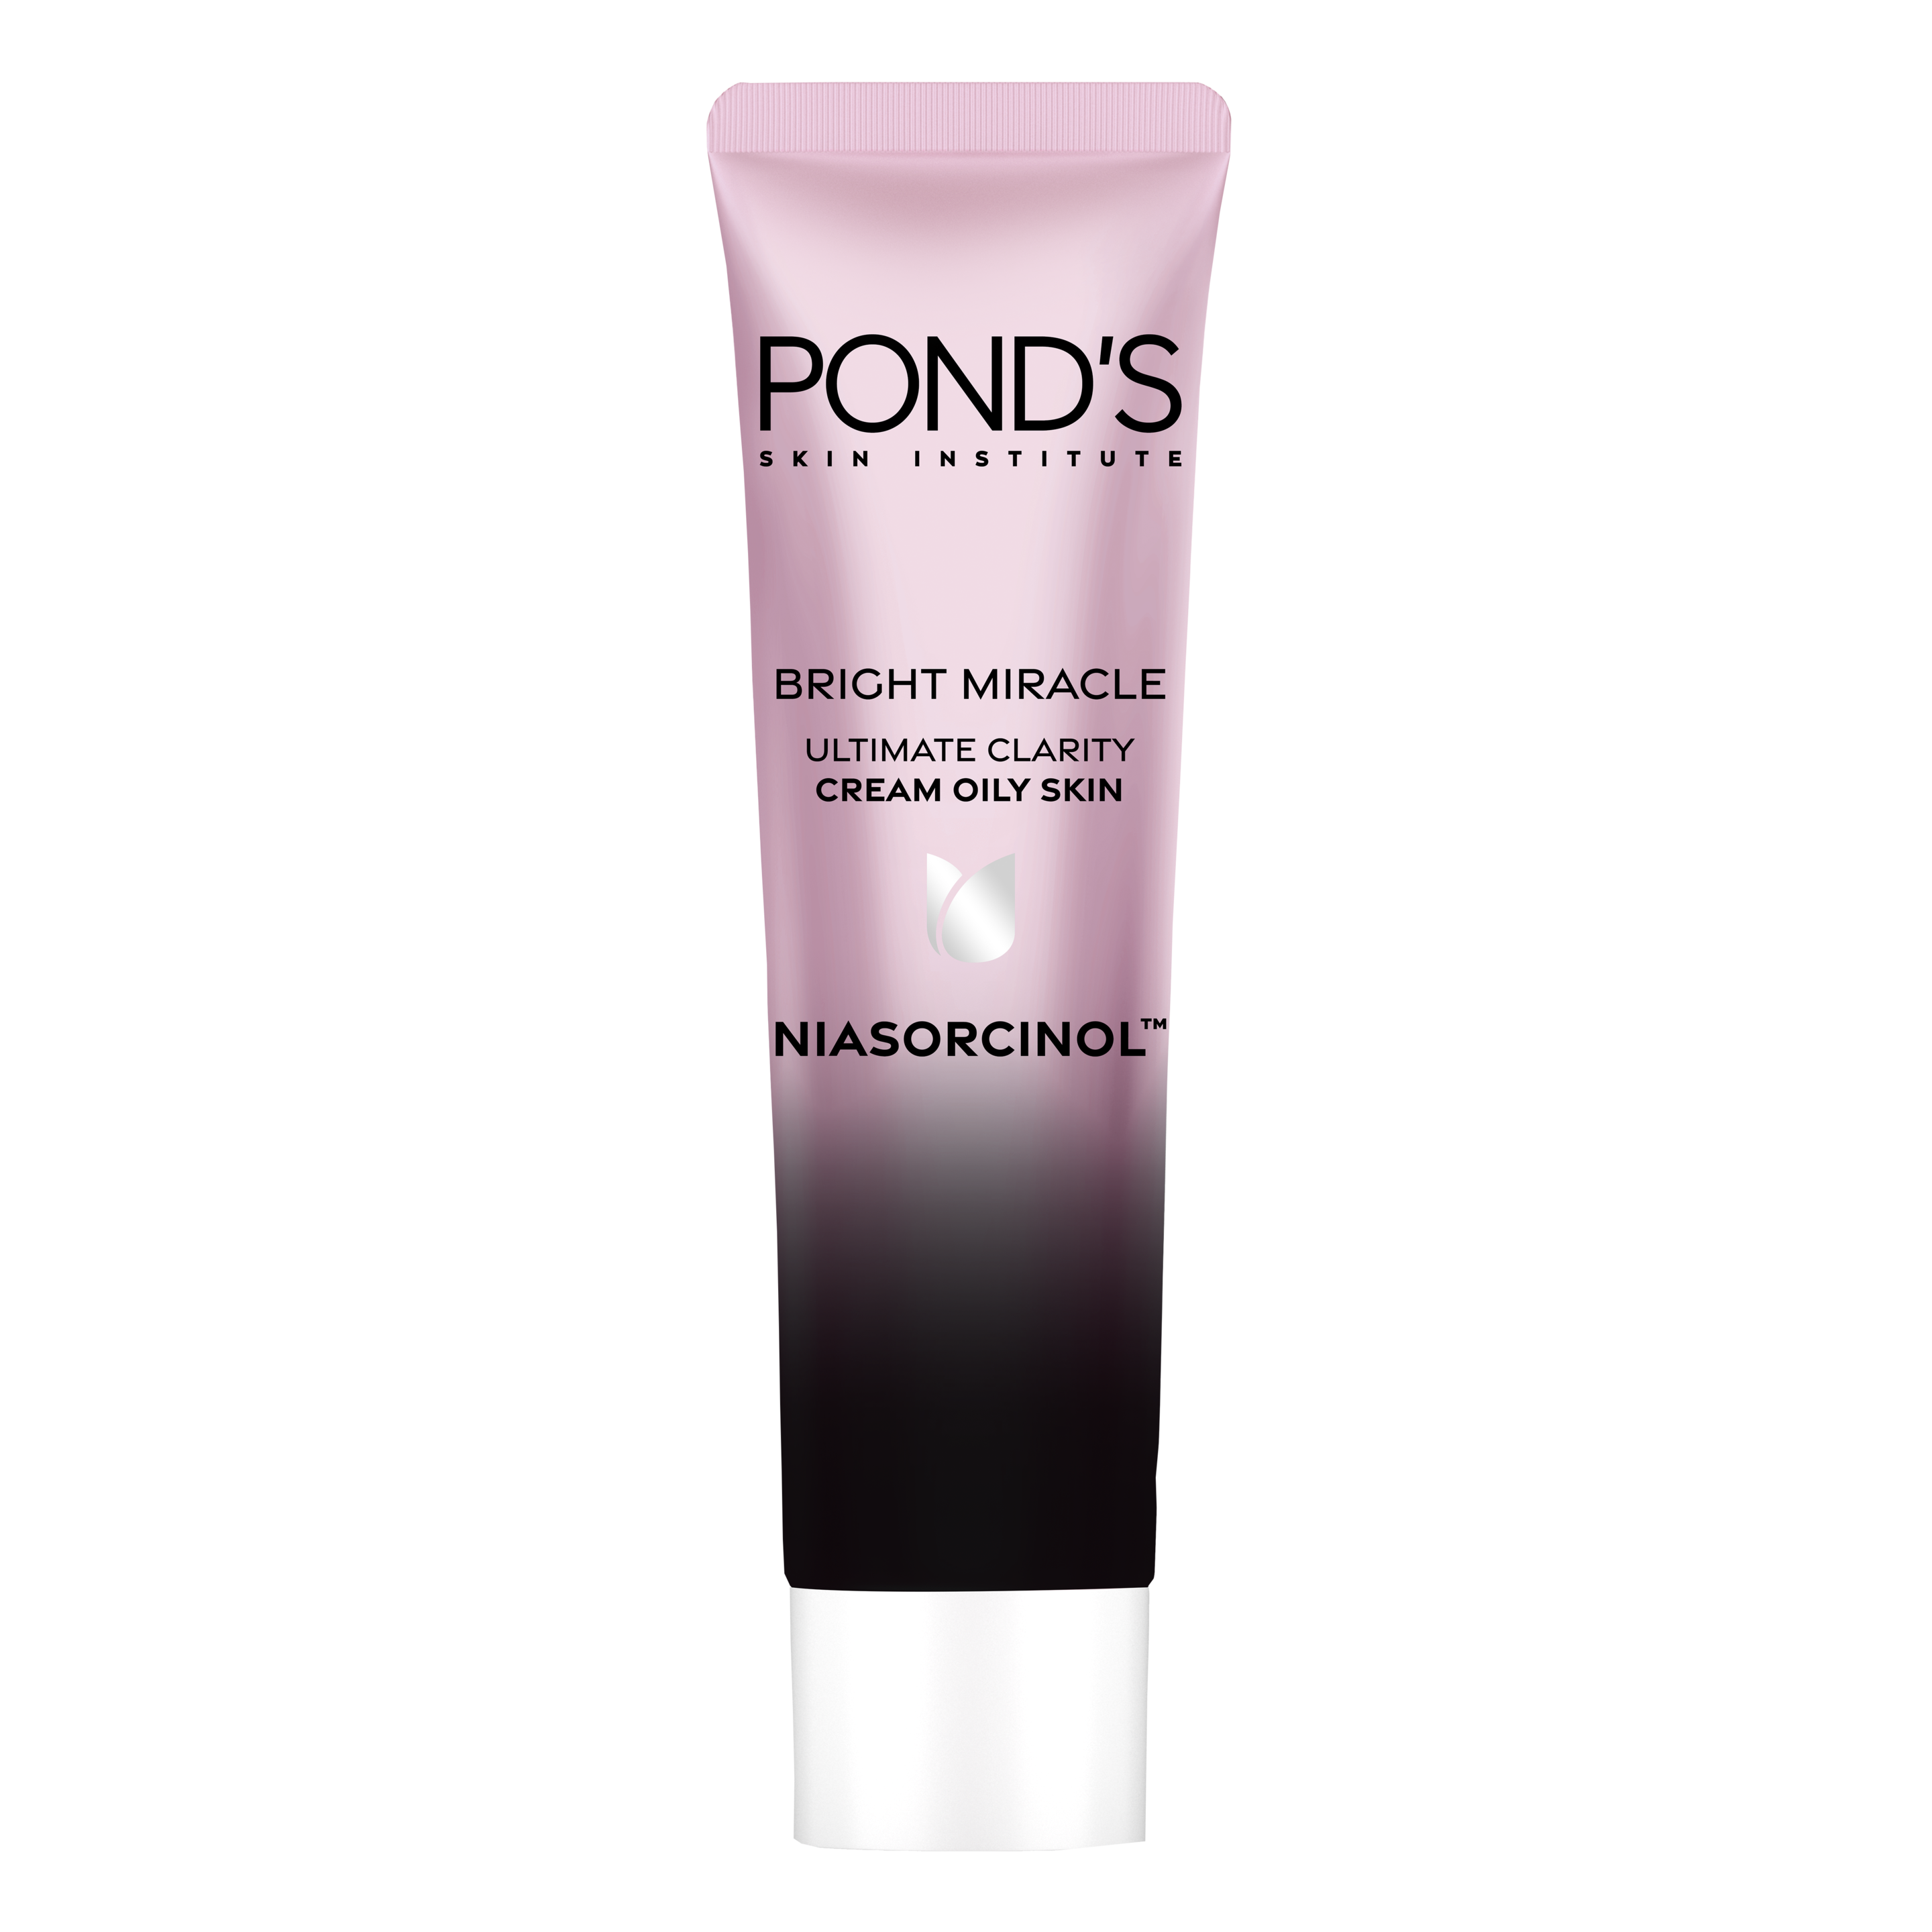 POND’s Bright Miracle Ultimate Clarity Cream for Oily Skin